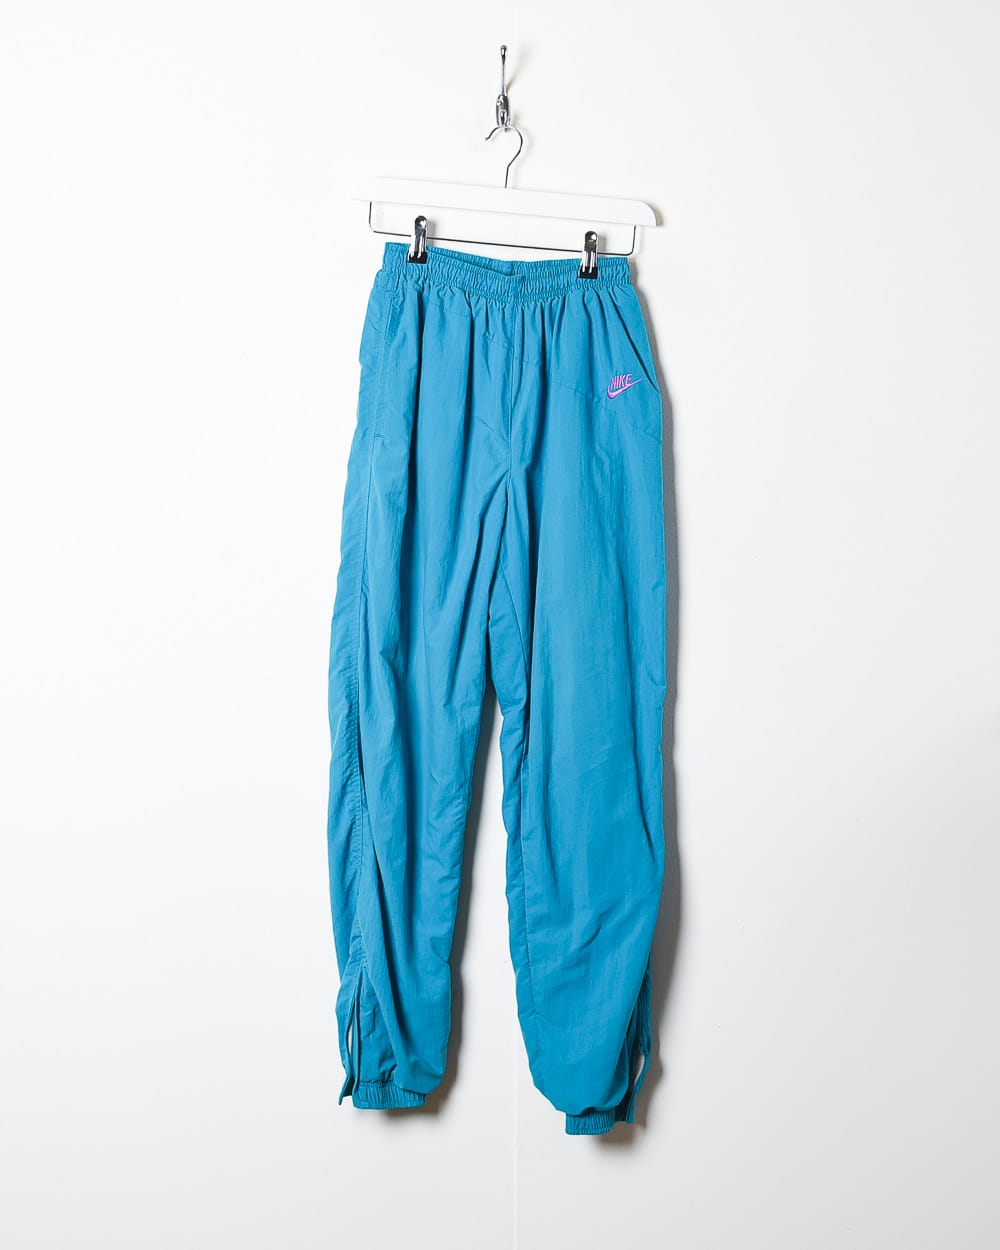 Blue Nike 80s Tracksuit Bottoms - Small